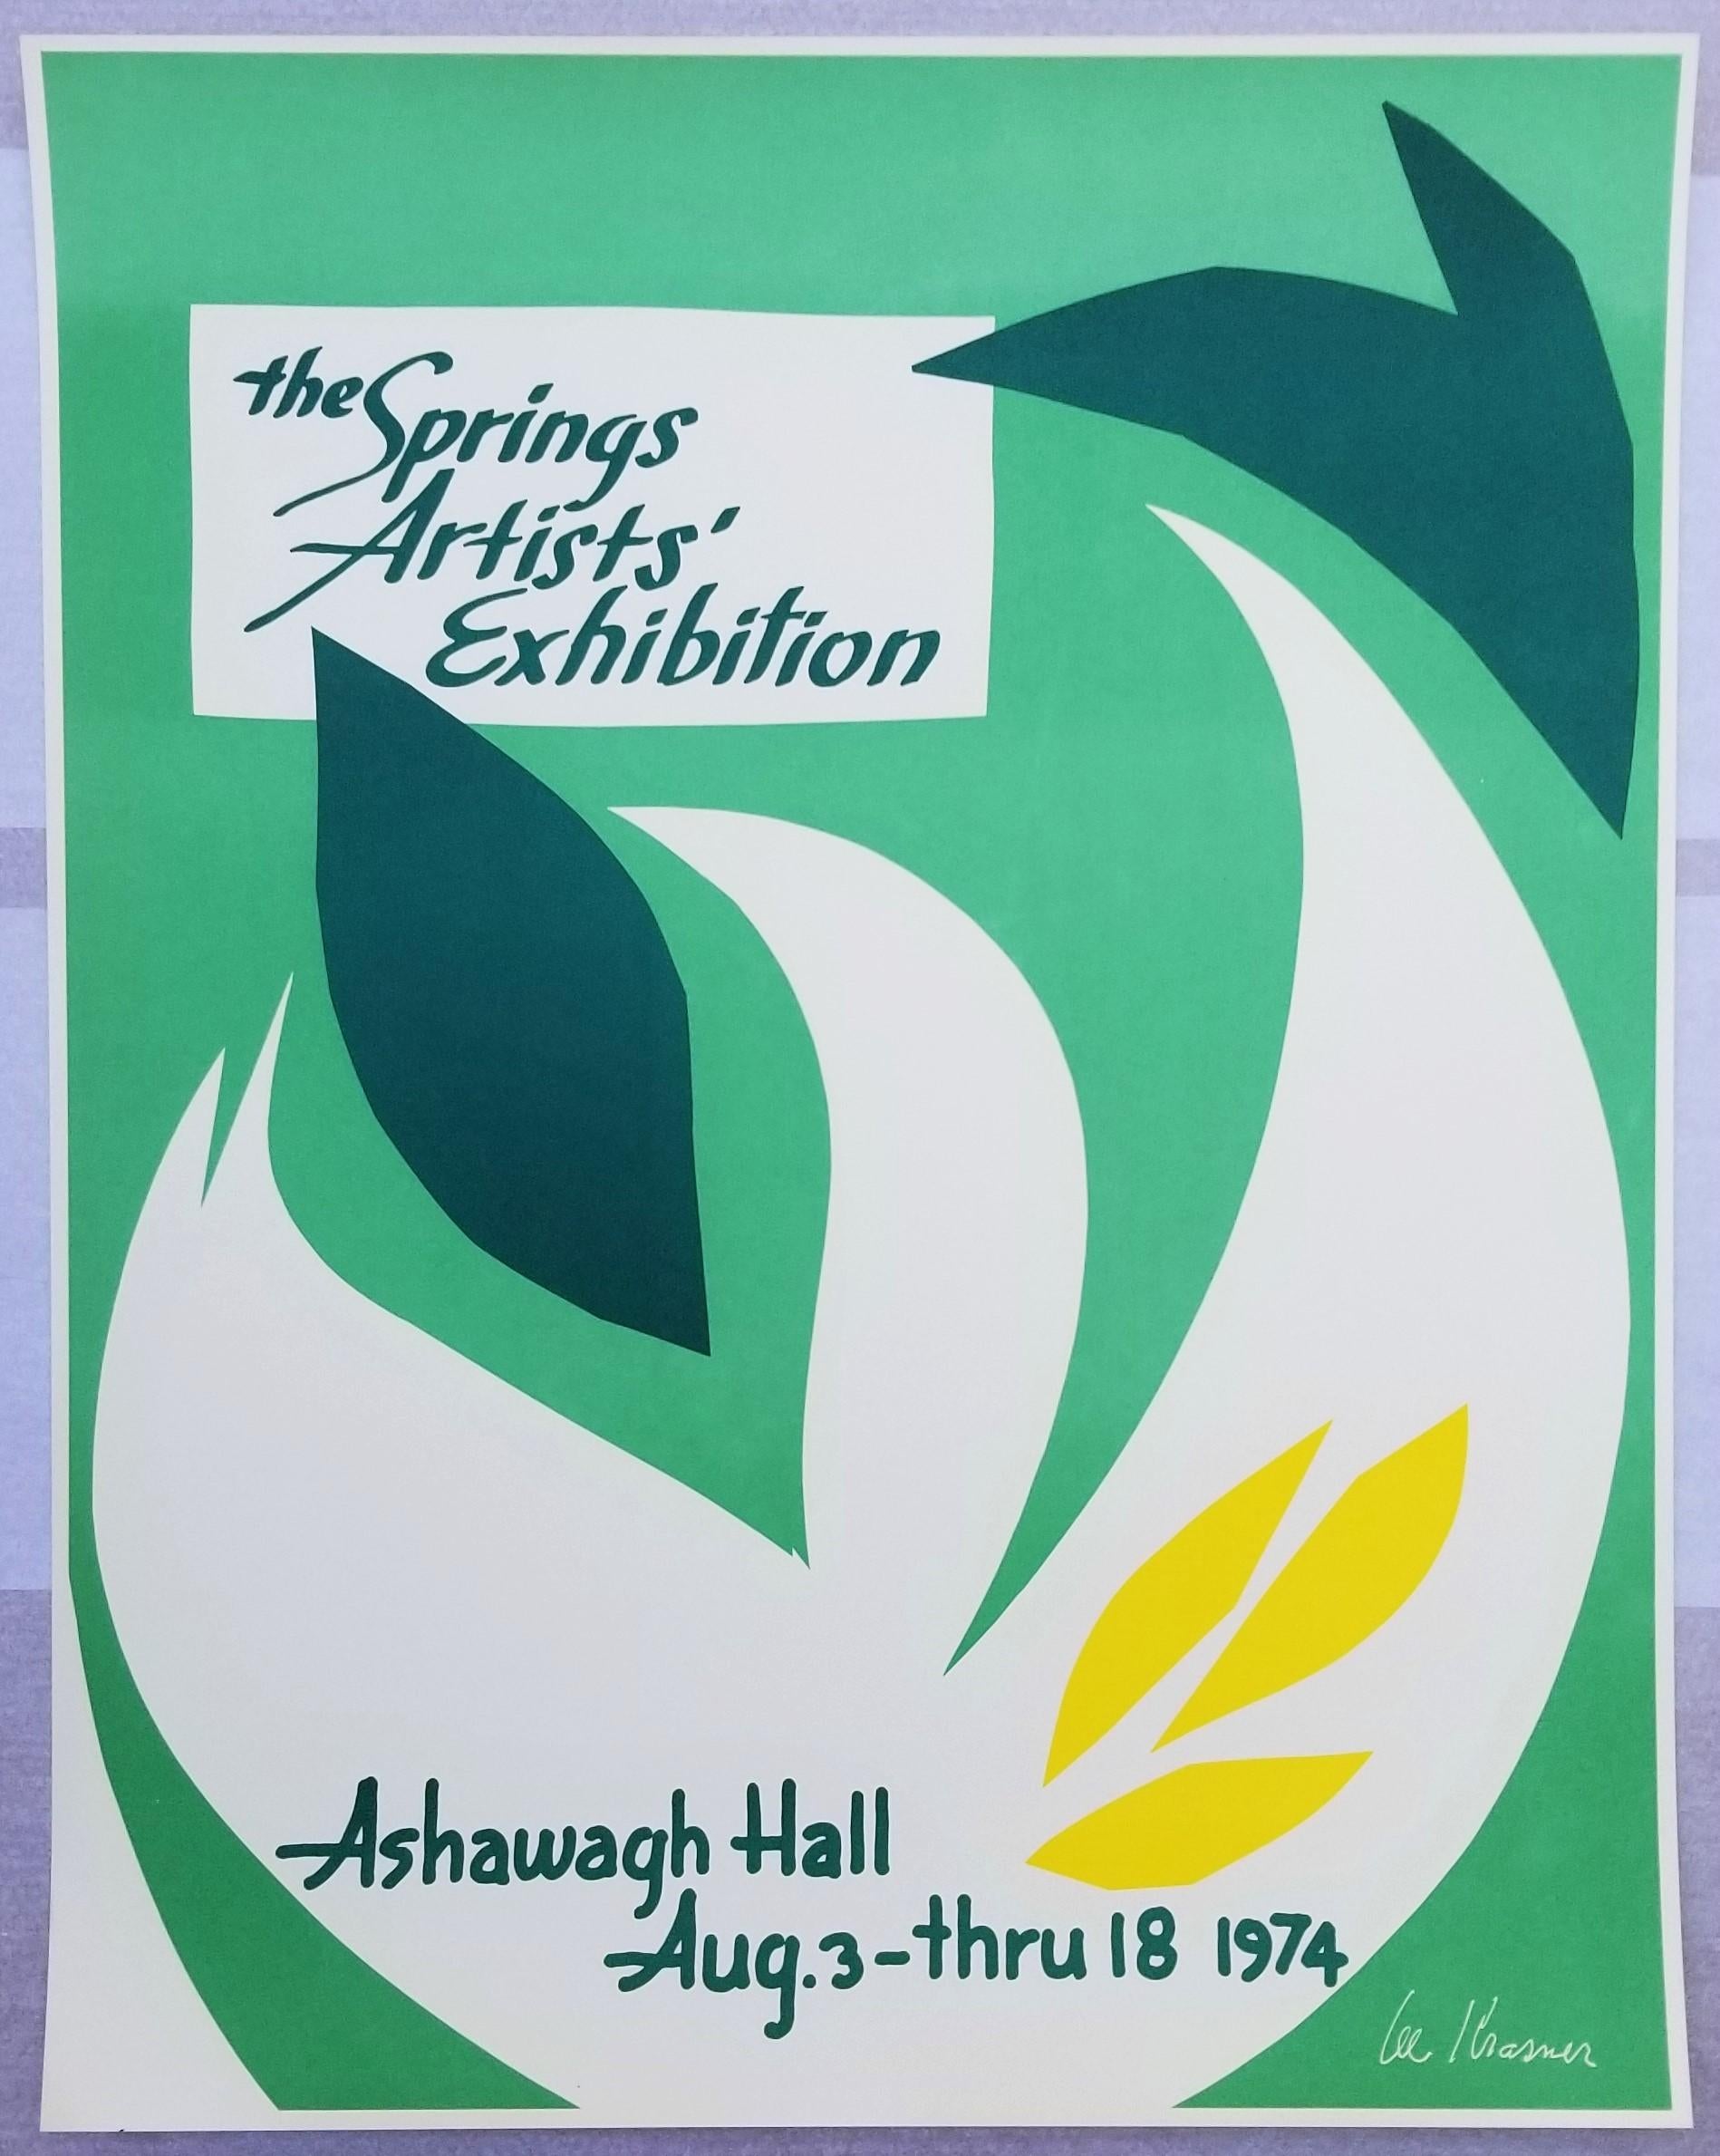 Ashawagh Hall: The Springs Artists' Exhibition Poster /// Female Artist Abstract - Print by Lee Krasner